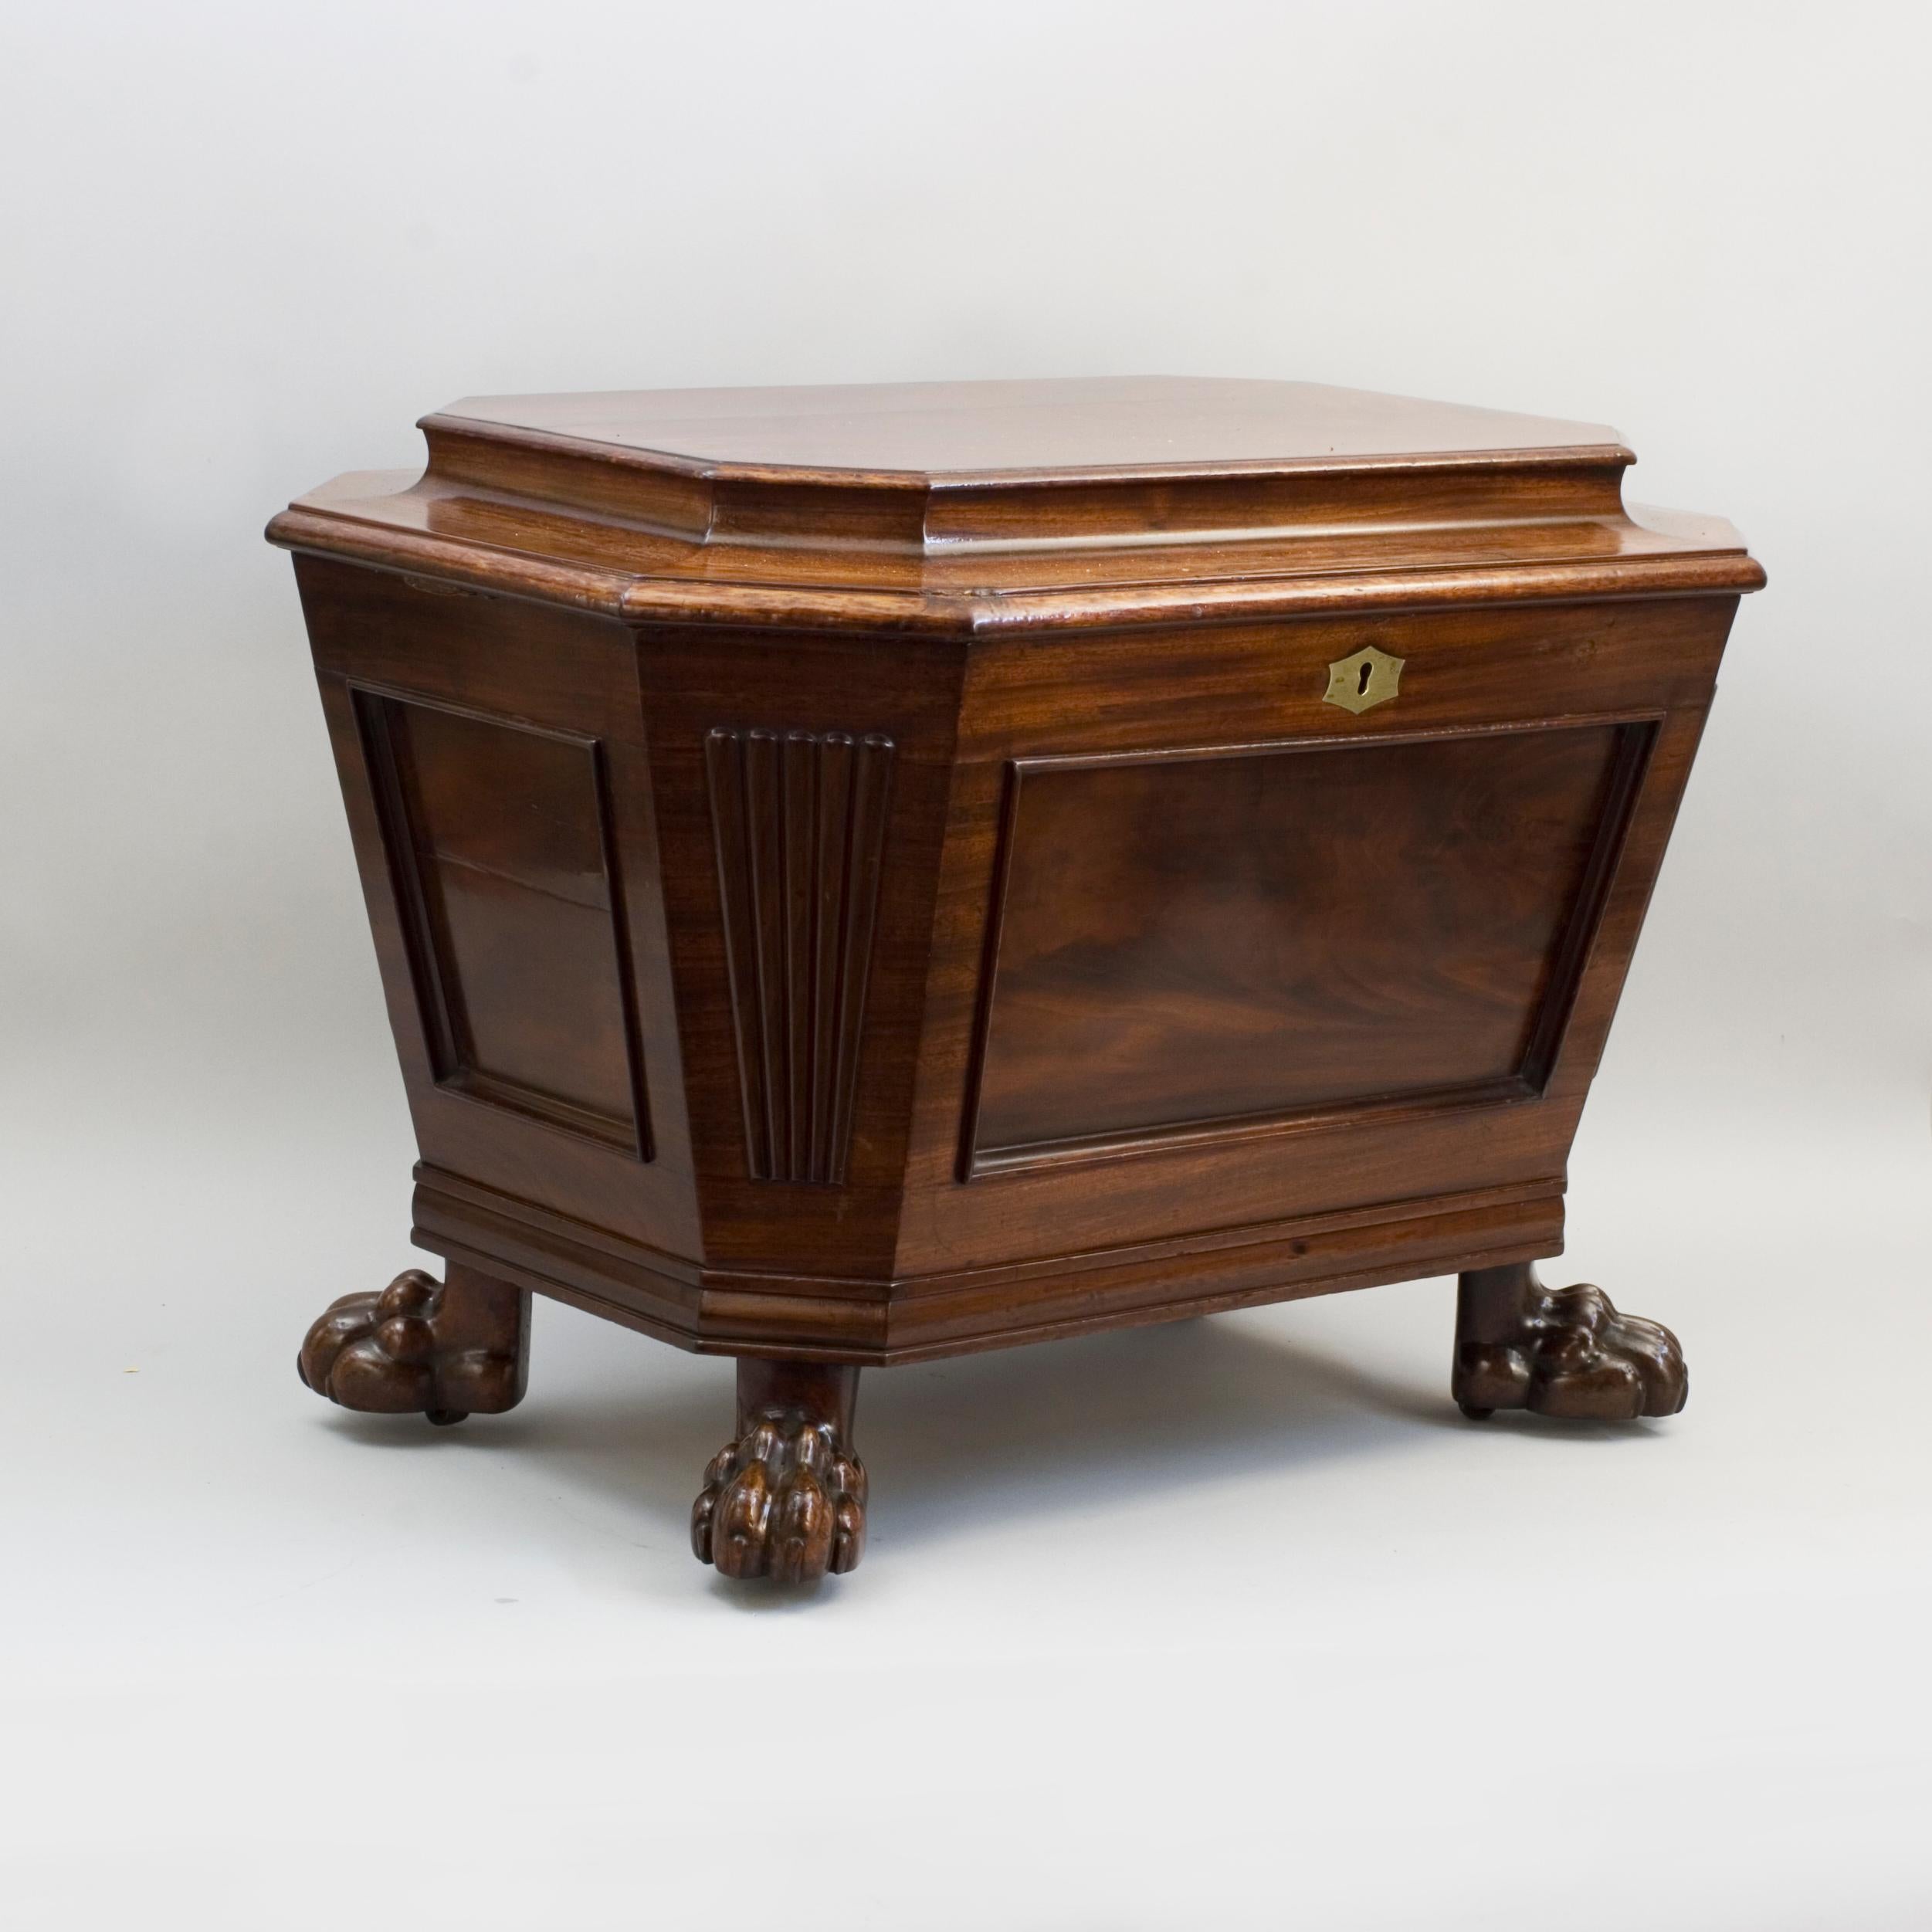 Regency Mahogany Sarcophagus Wine Cooler.
A superb quality Regency mahogany wine cooler, champagne cooler of sarcophagus form with a cavetto moulded hinged top lid, opening to reveal the original lead lined interior. The tapering body having cut